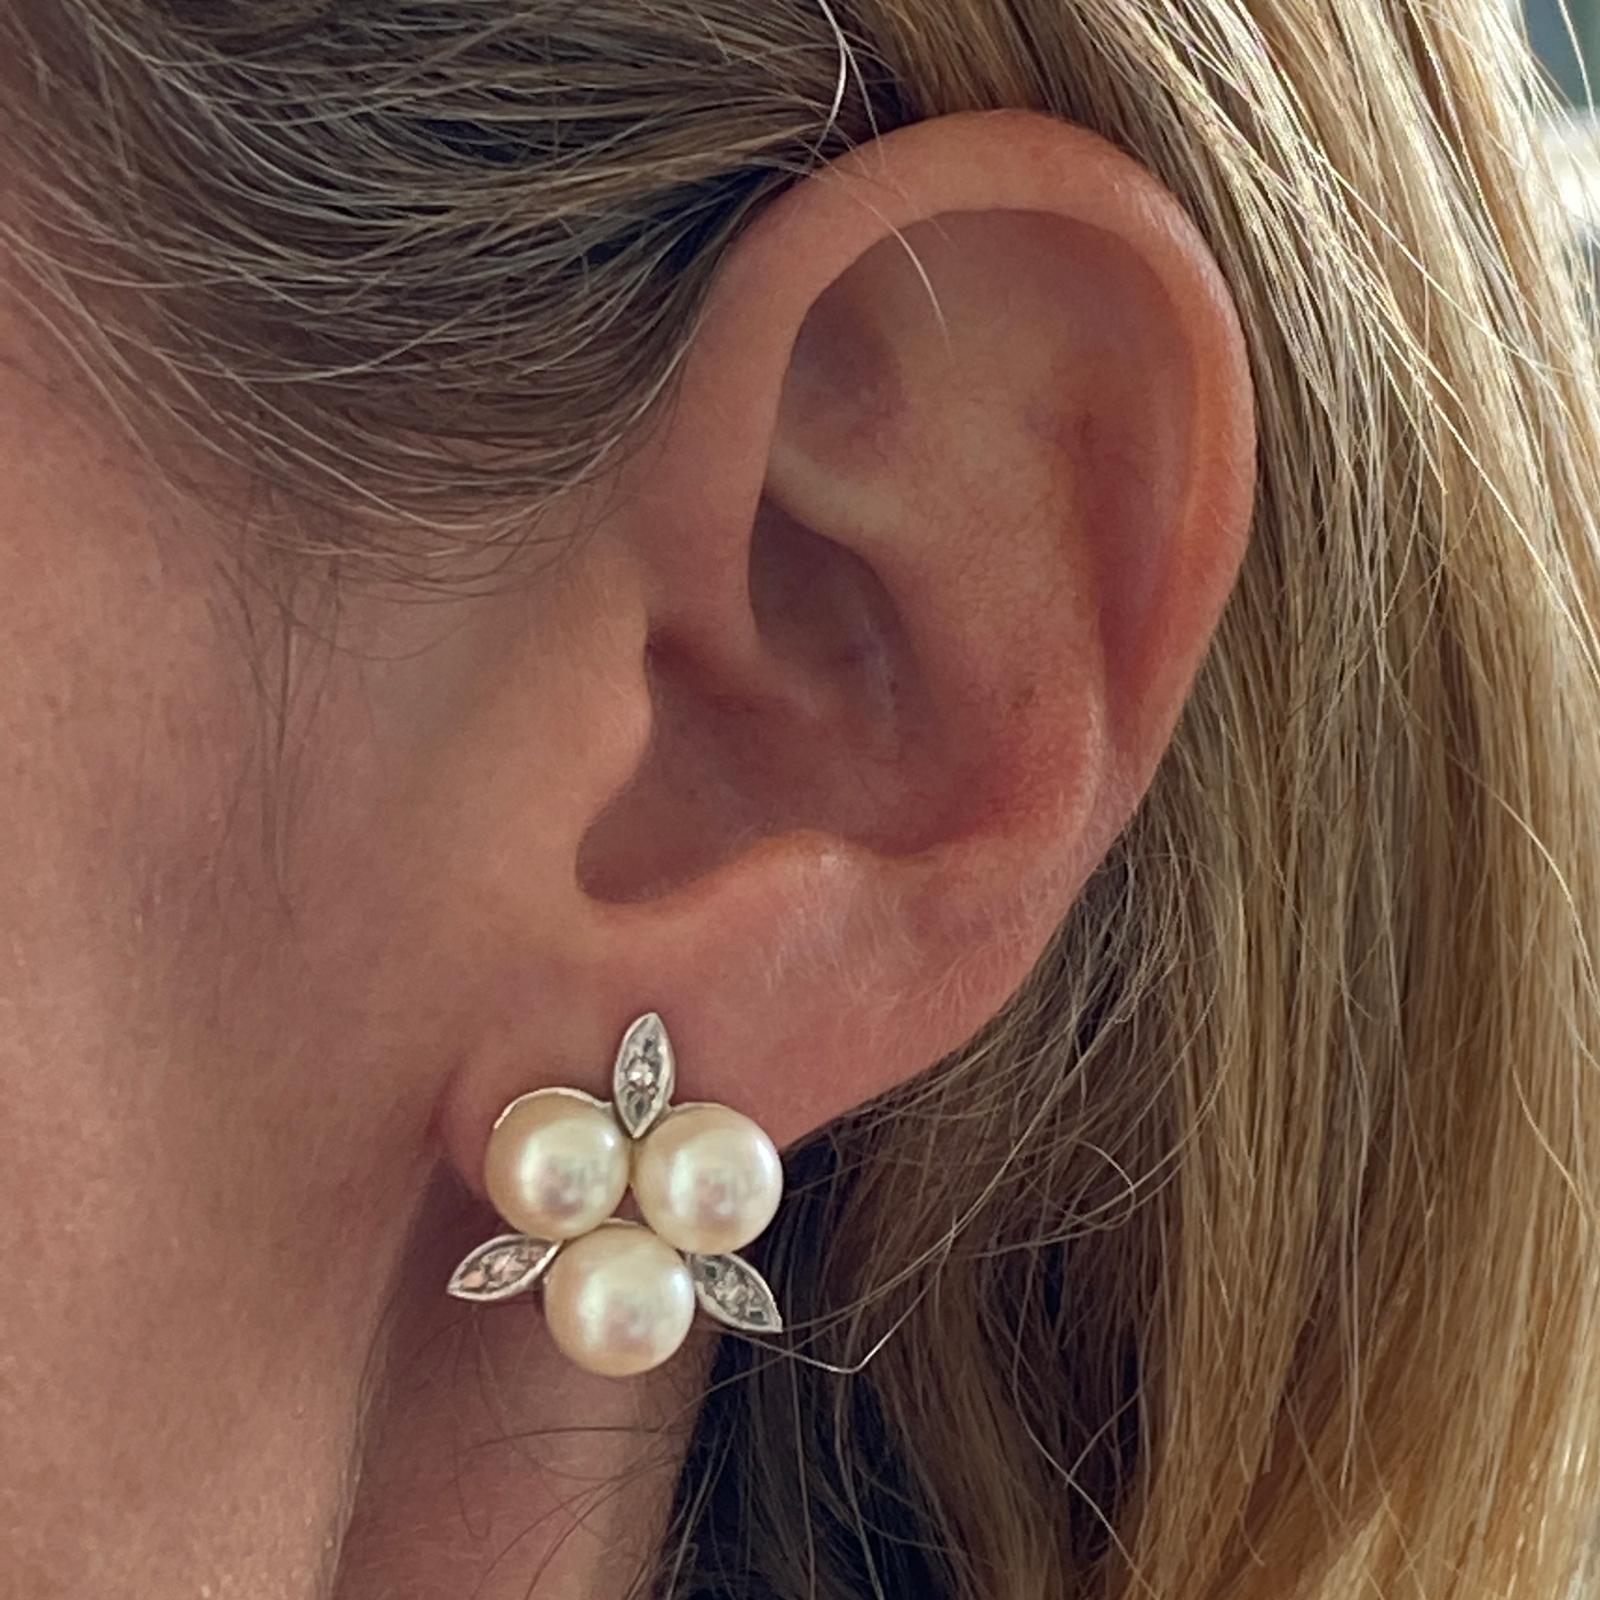 Diamond and pearl floral motif earrings are fashioned in 14 karat white gold. The earrings feature 6 cultured 7.5mm pearls and 6 single cut diamonds weighing approximately .06 carat total weight. The earrings measure 20 x 20mm and feature clip backs.